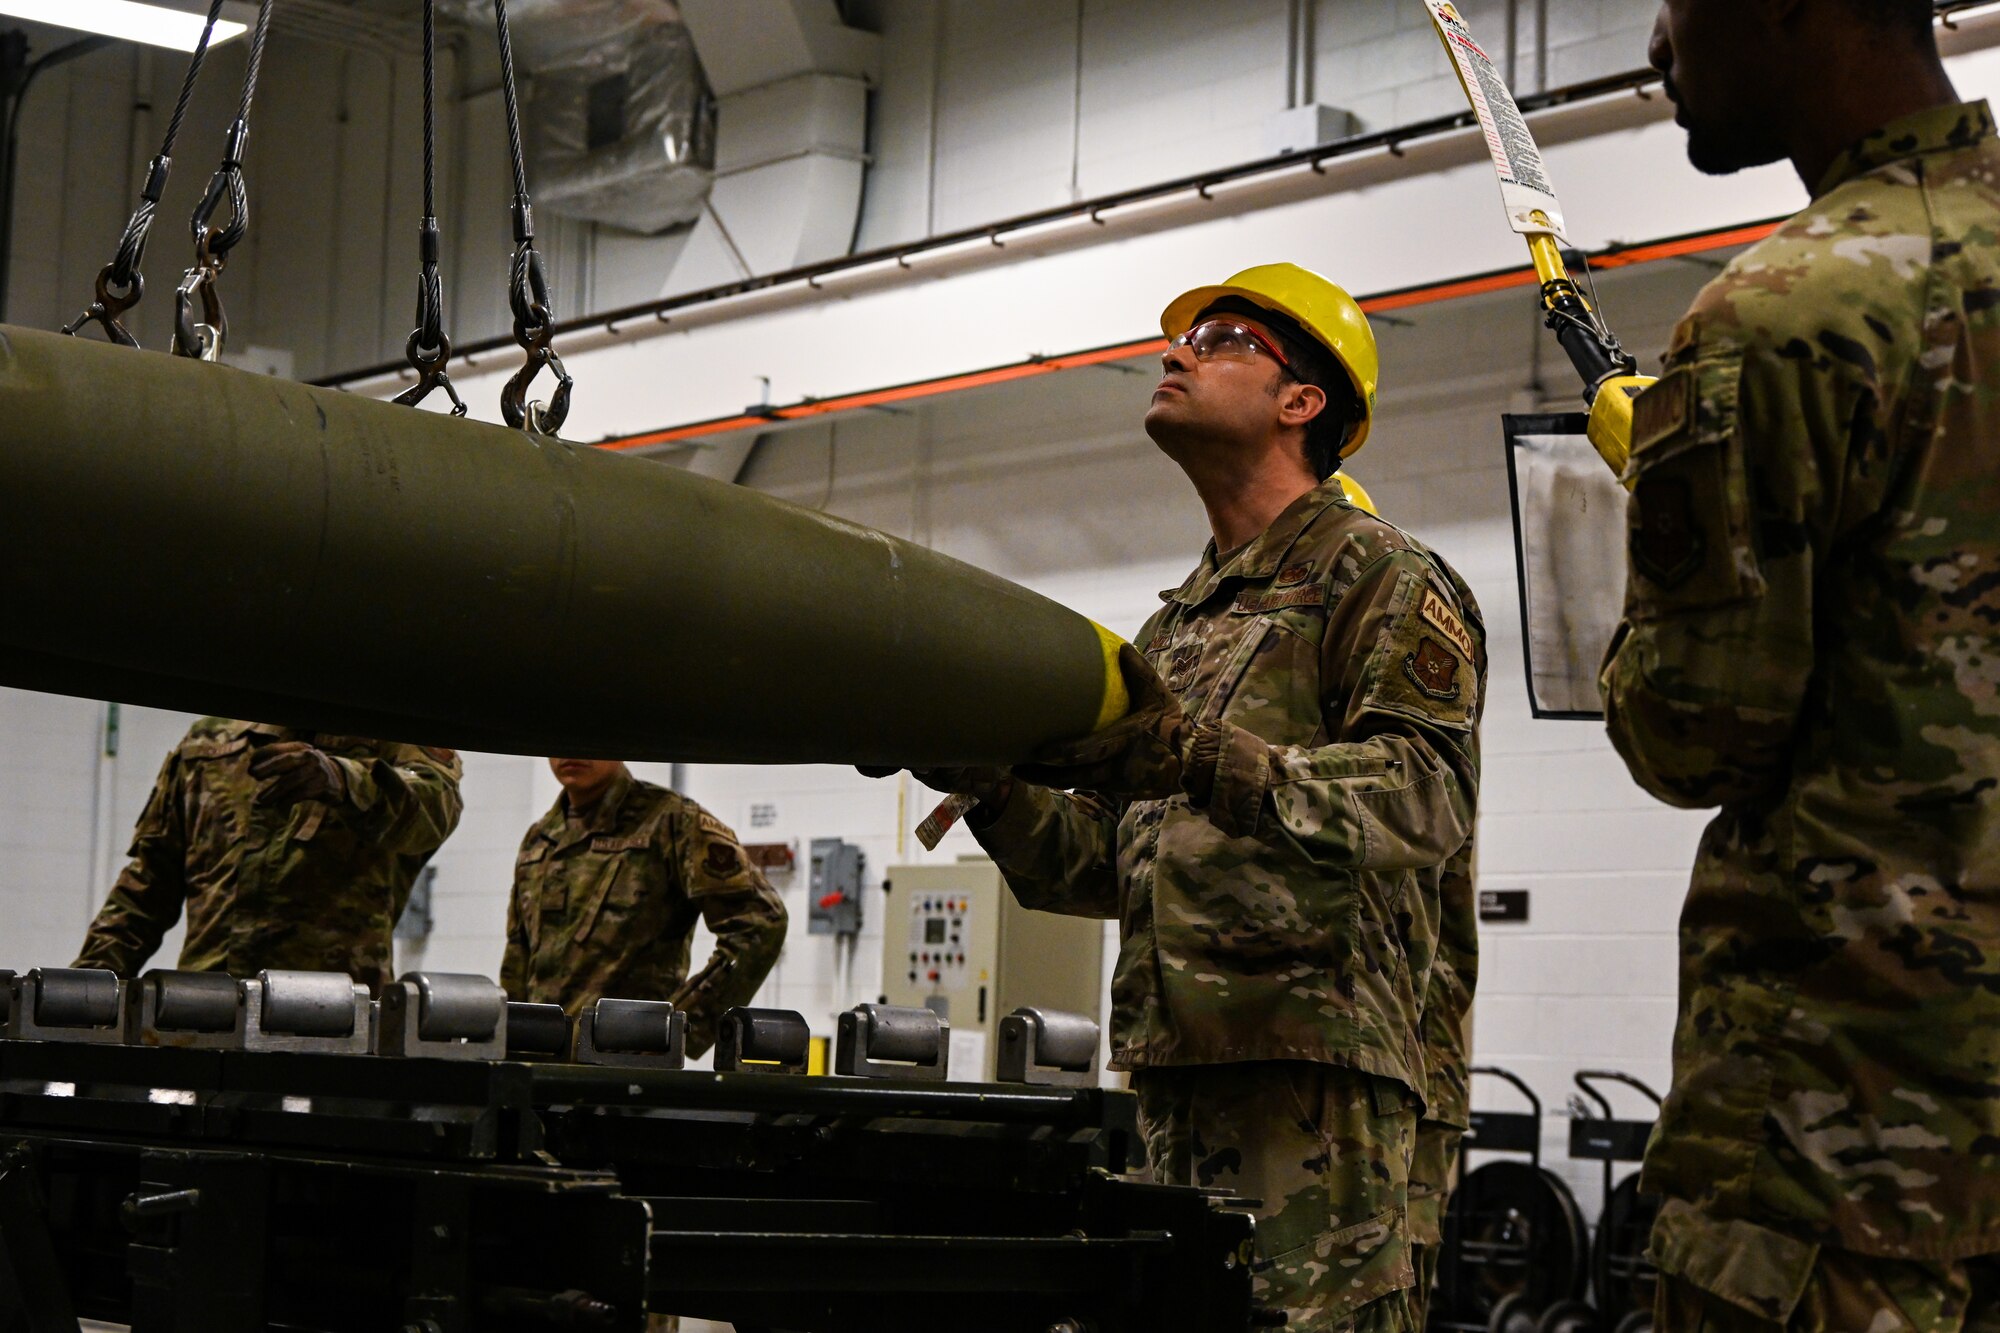 U.S. Air Force Staff Sgt. Kenneth Hignite, 5th Munitions Squadron munitions stockpile crew chief, prepares an Mk-82 ordnance during Operation Tundra Swan at Minot Air Force Base, North Dakota, Oct. 2, 2023. Because the Mk-82 is a free-fall ordnance, its accuracy depends on the platform or pilot delivering it. (U.S. Air Force photo by Airman 1st Class Alyssa Bankston)